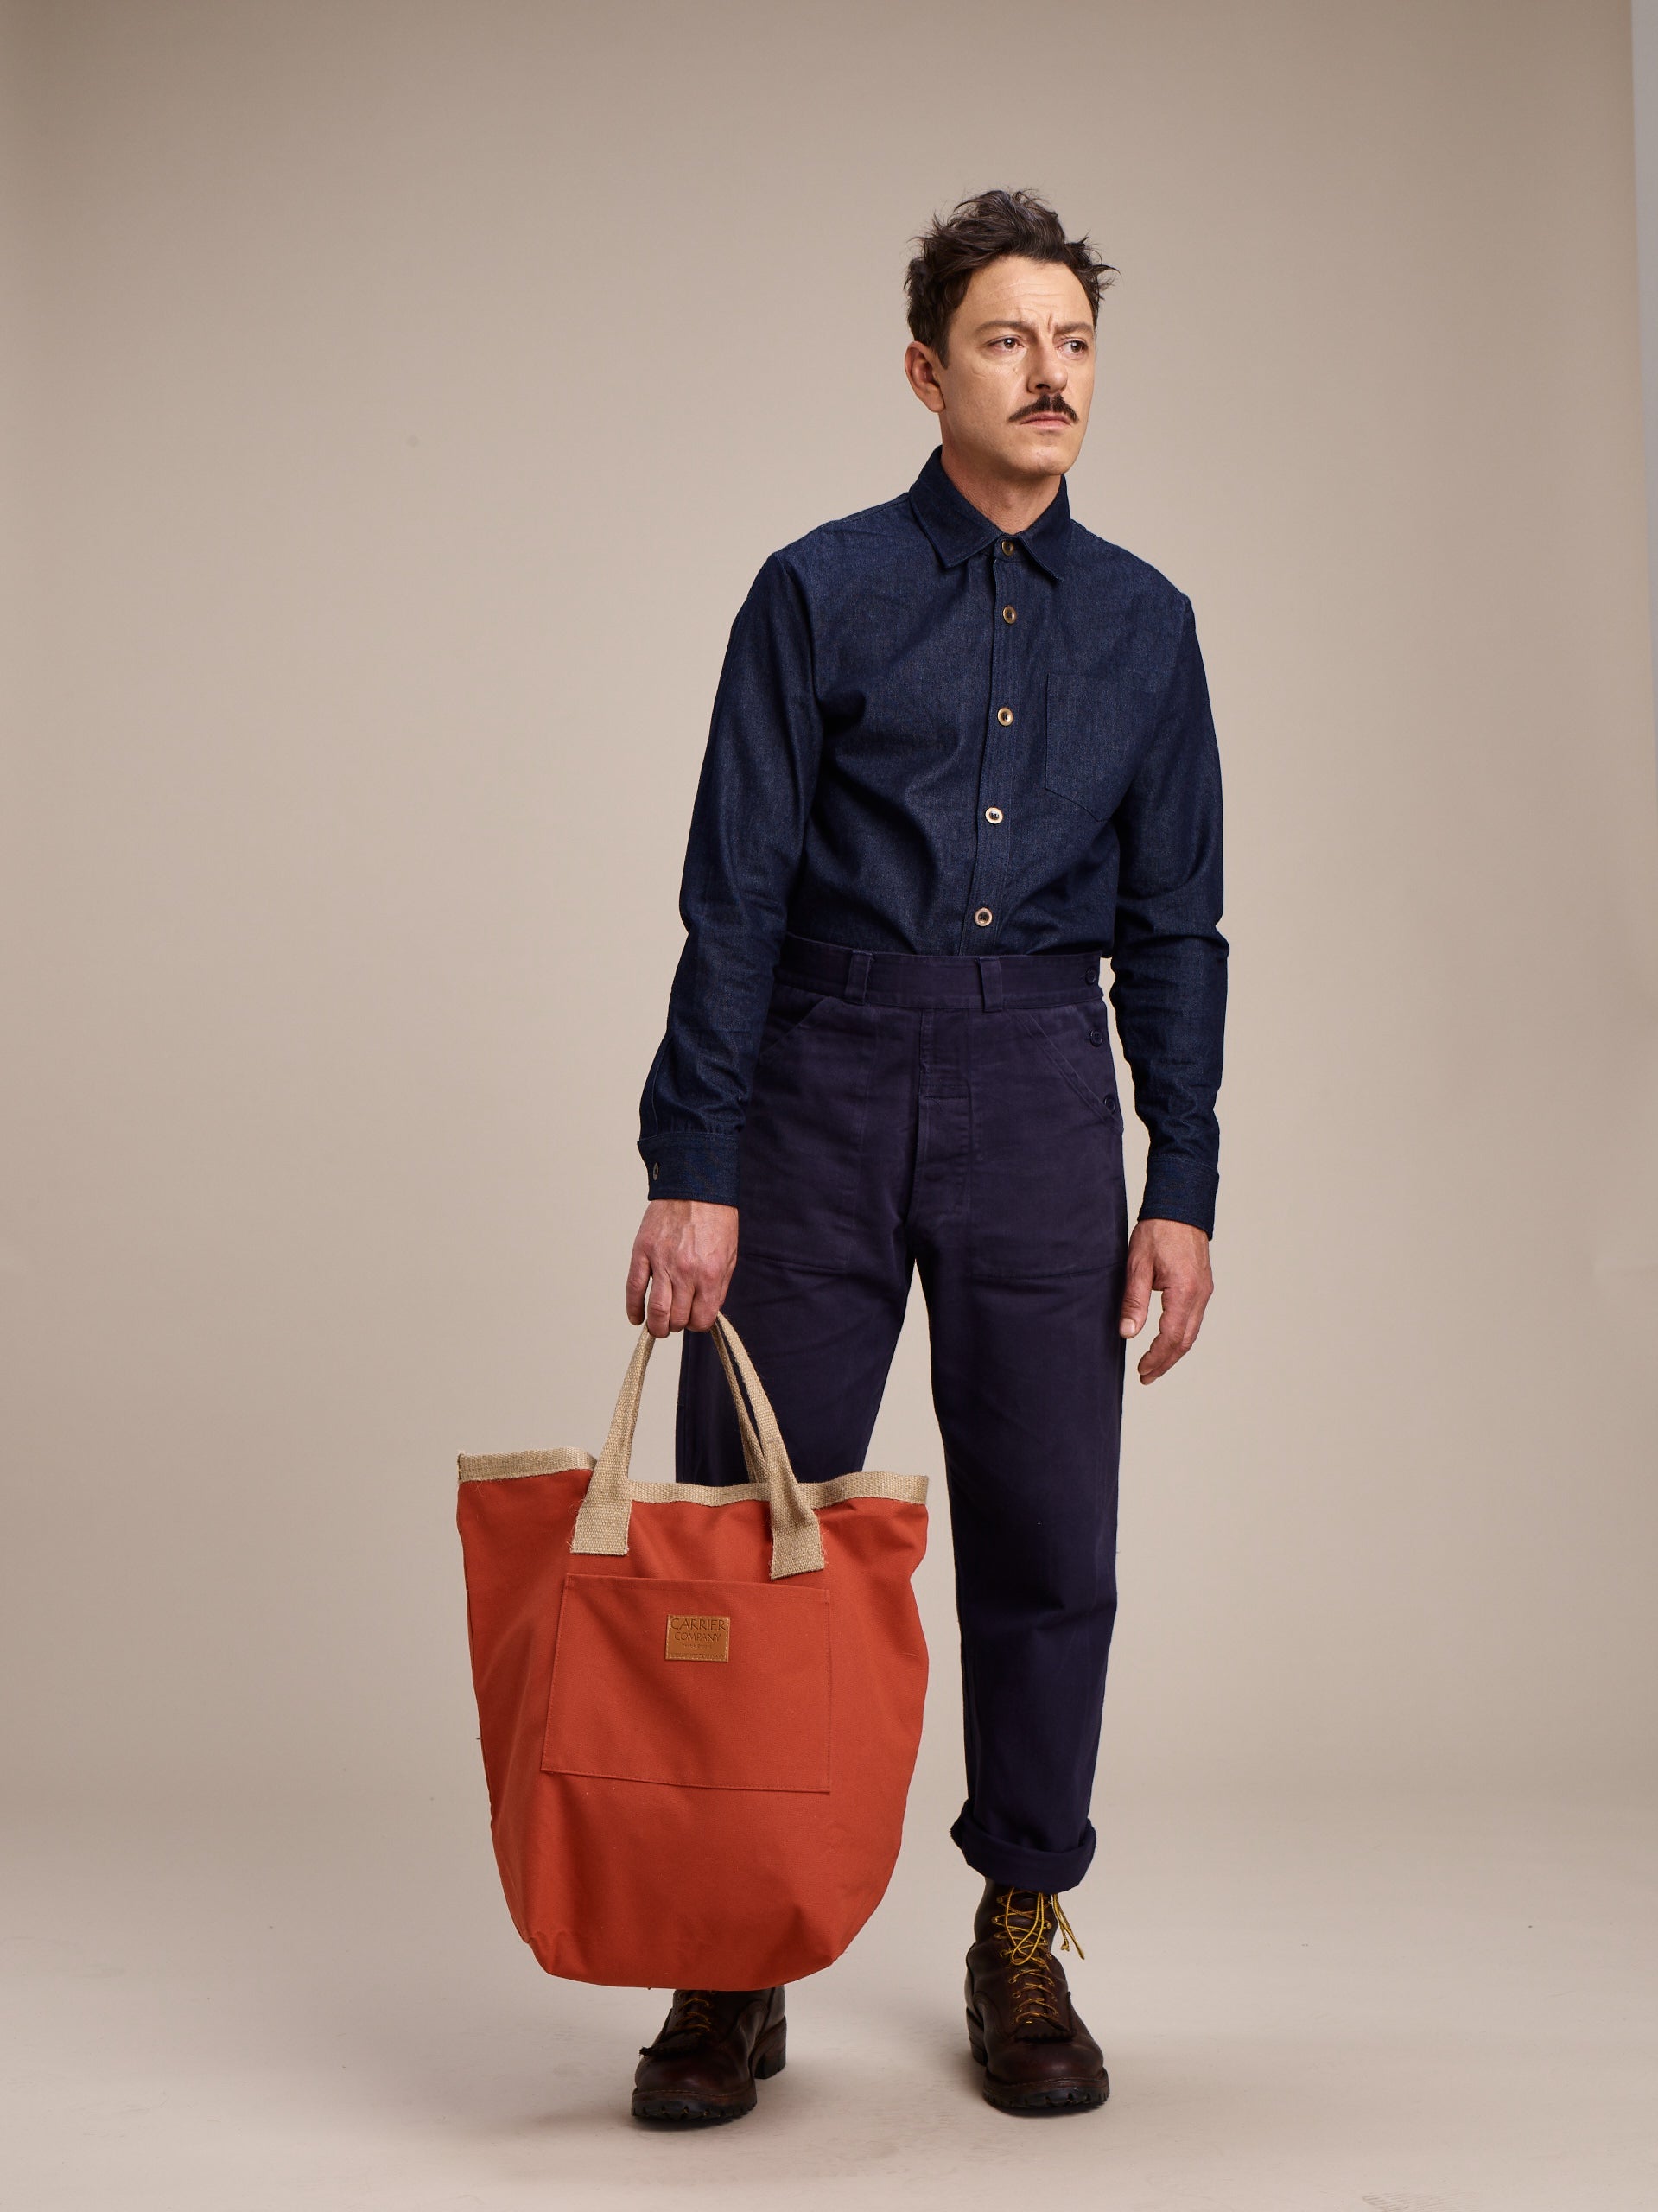 Man Wearing Carrier Company Denim Collar Shirt with Men's Work Trouser in Navy holding Loot & Boot Bag in Orange